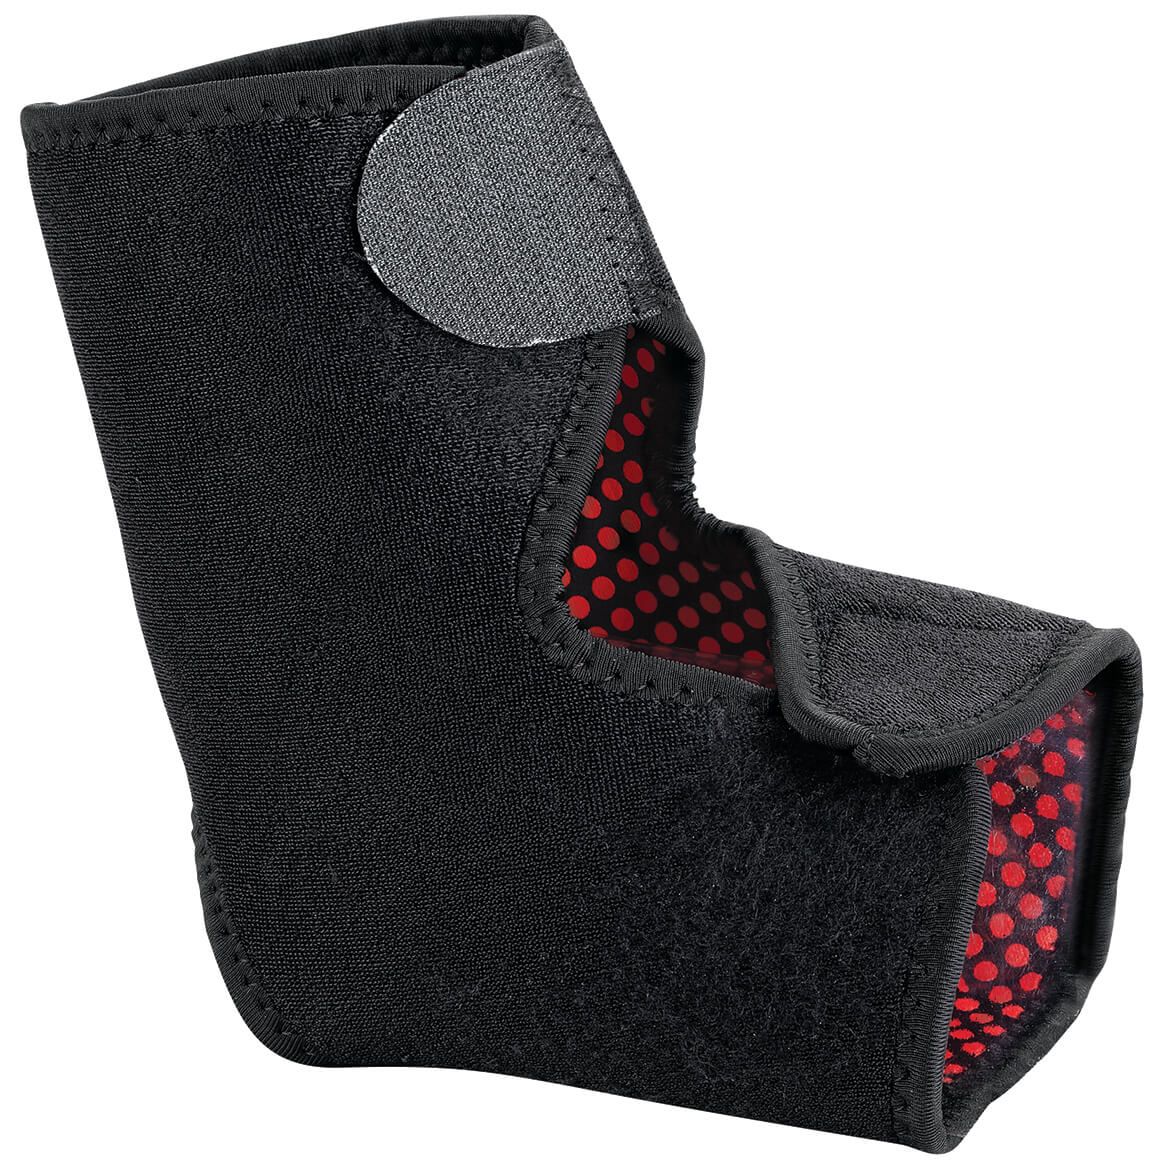 LivingSURE™ Infrared Heated Ankle Support + '-' + 372582